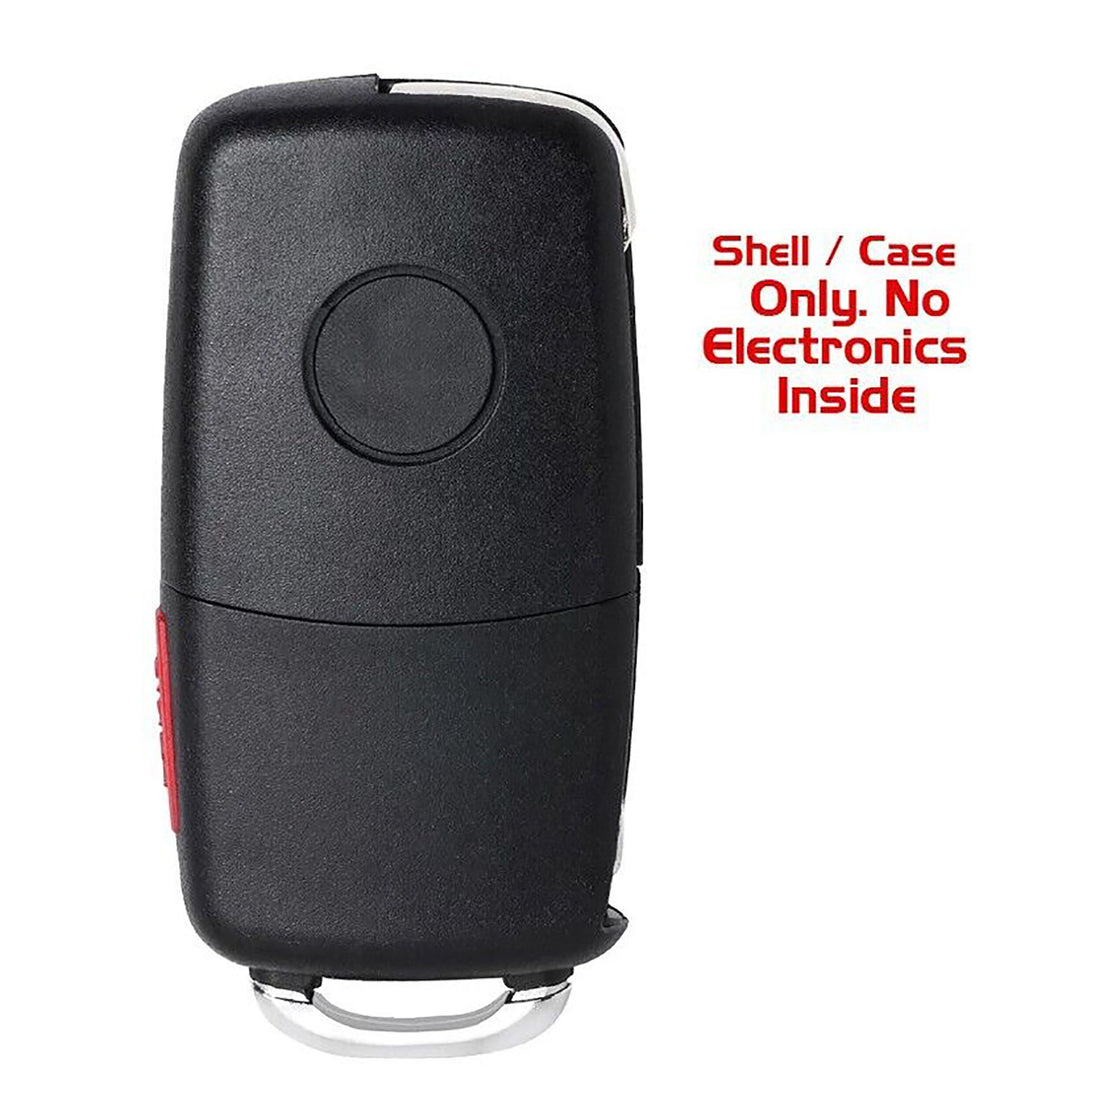 1x New Replacement Key Fob Remote SHELL / CASE Compatible with & Fit For Volkswagen VW Vehicle - MPN NBG010206T-04 (NO electronics or Chip inside)